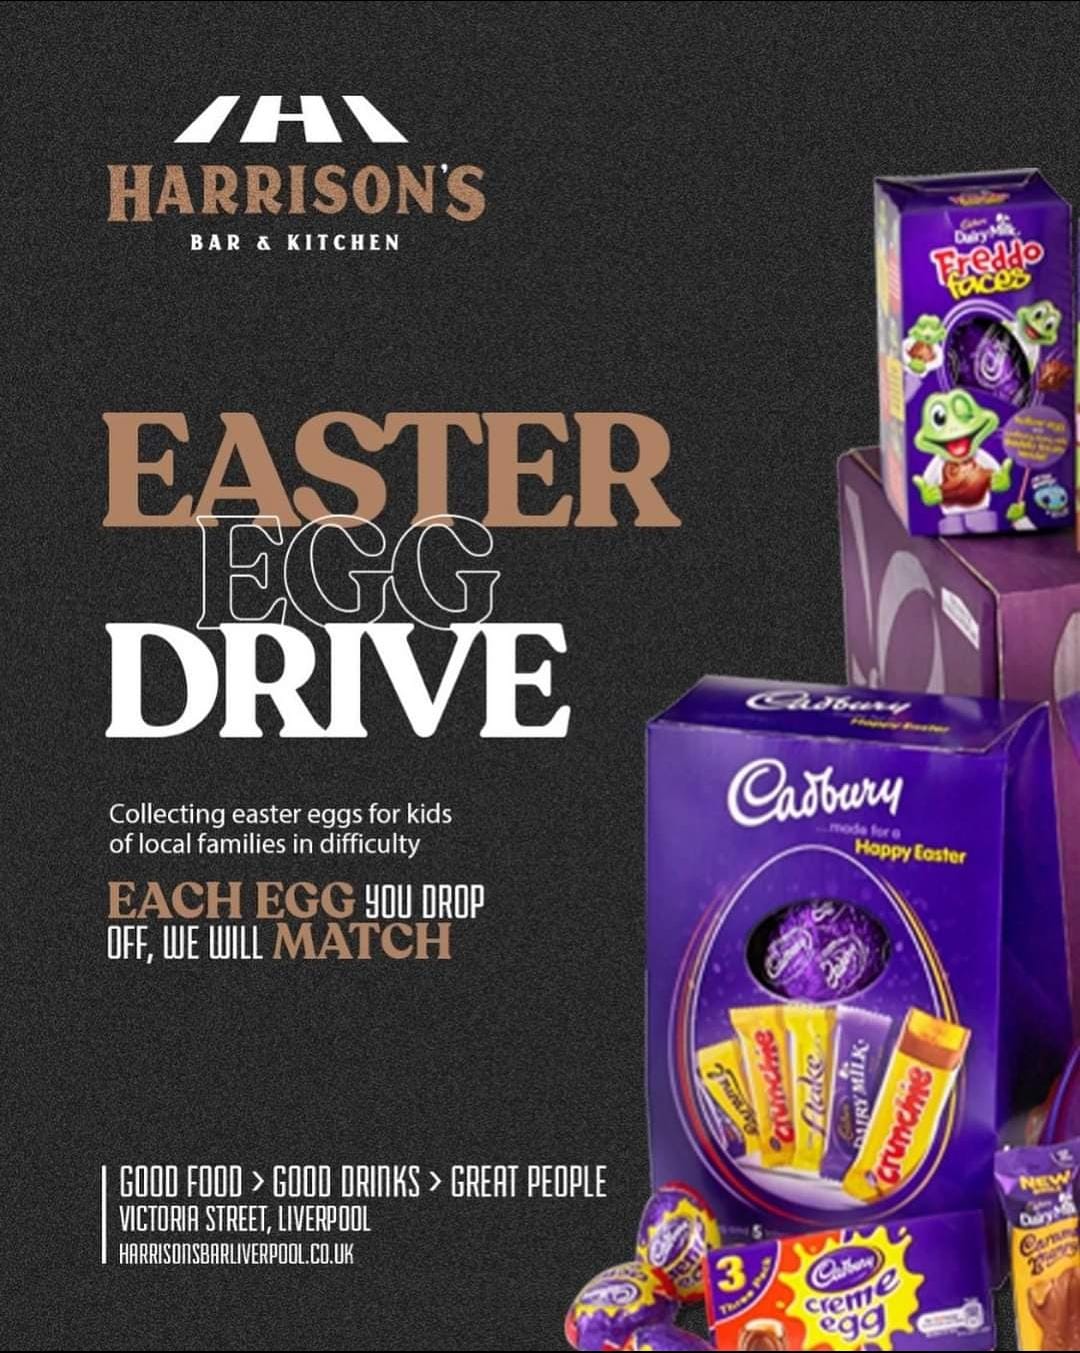 Popular Liverpool independent sites kick off their Easter Egg Appeal for 2023